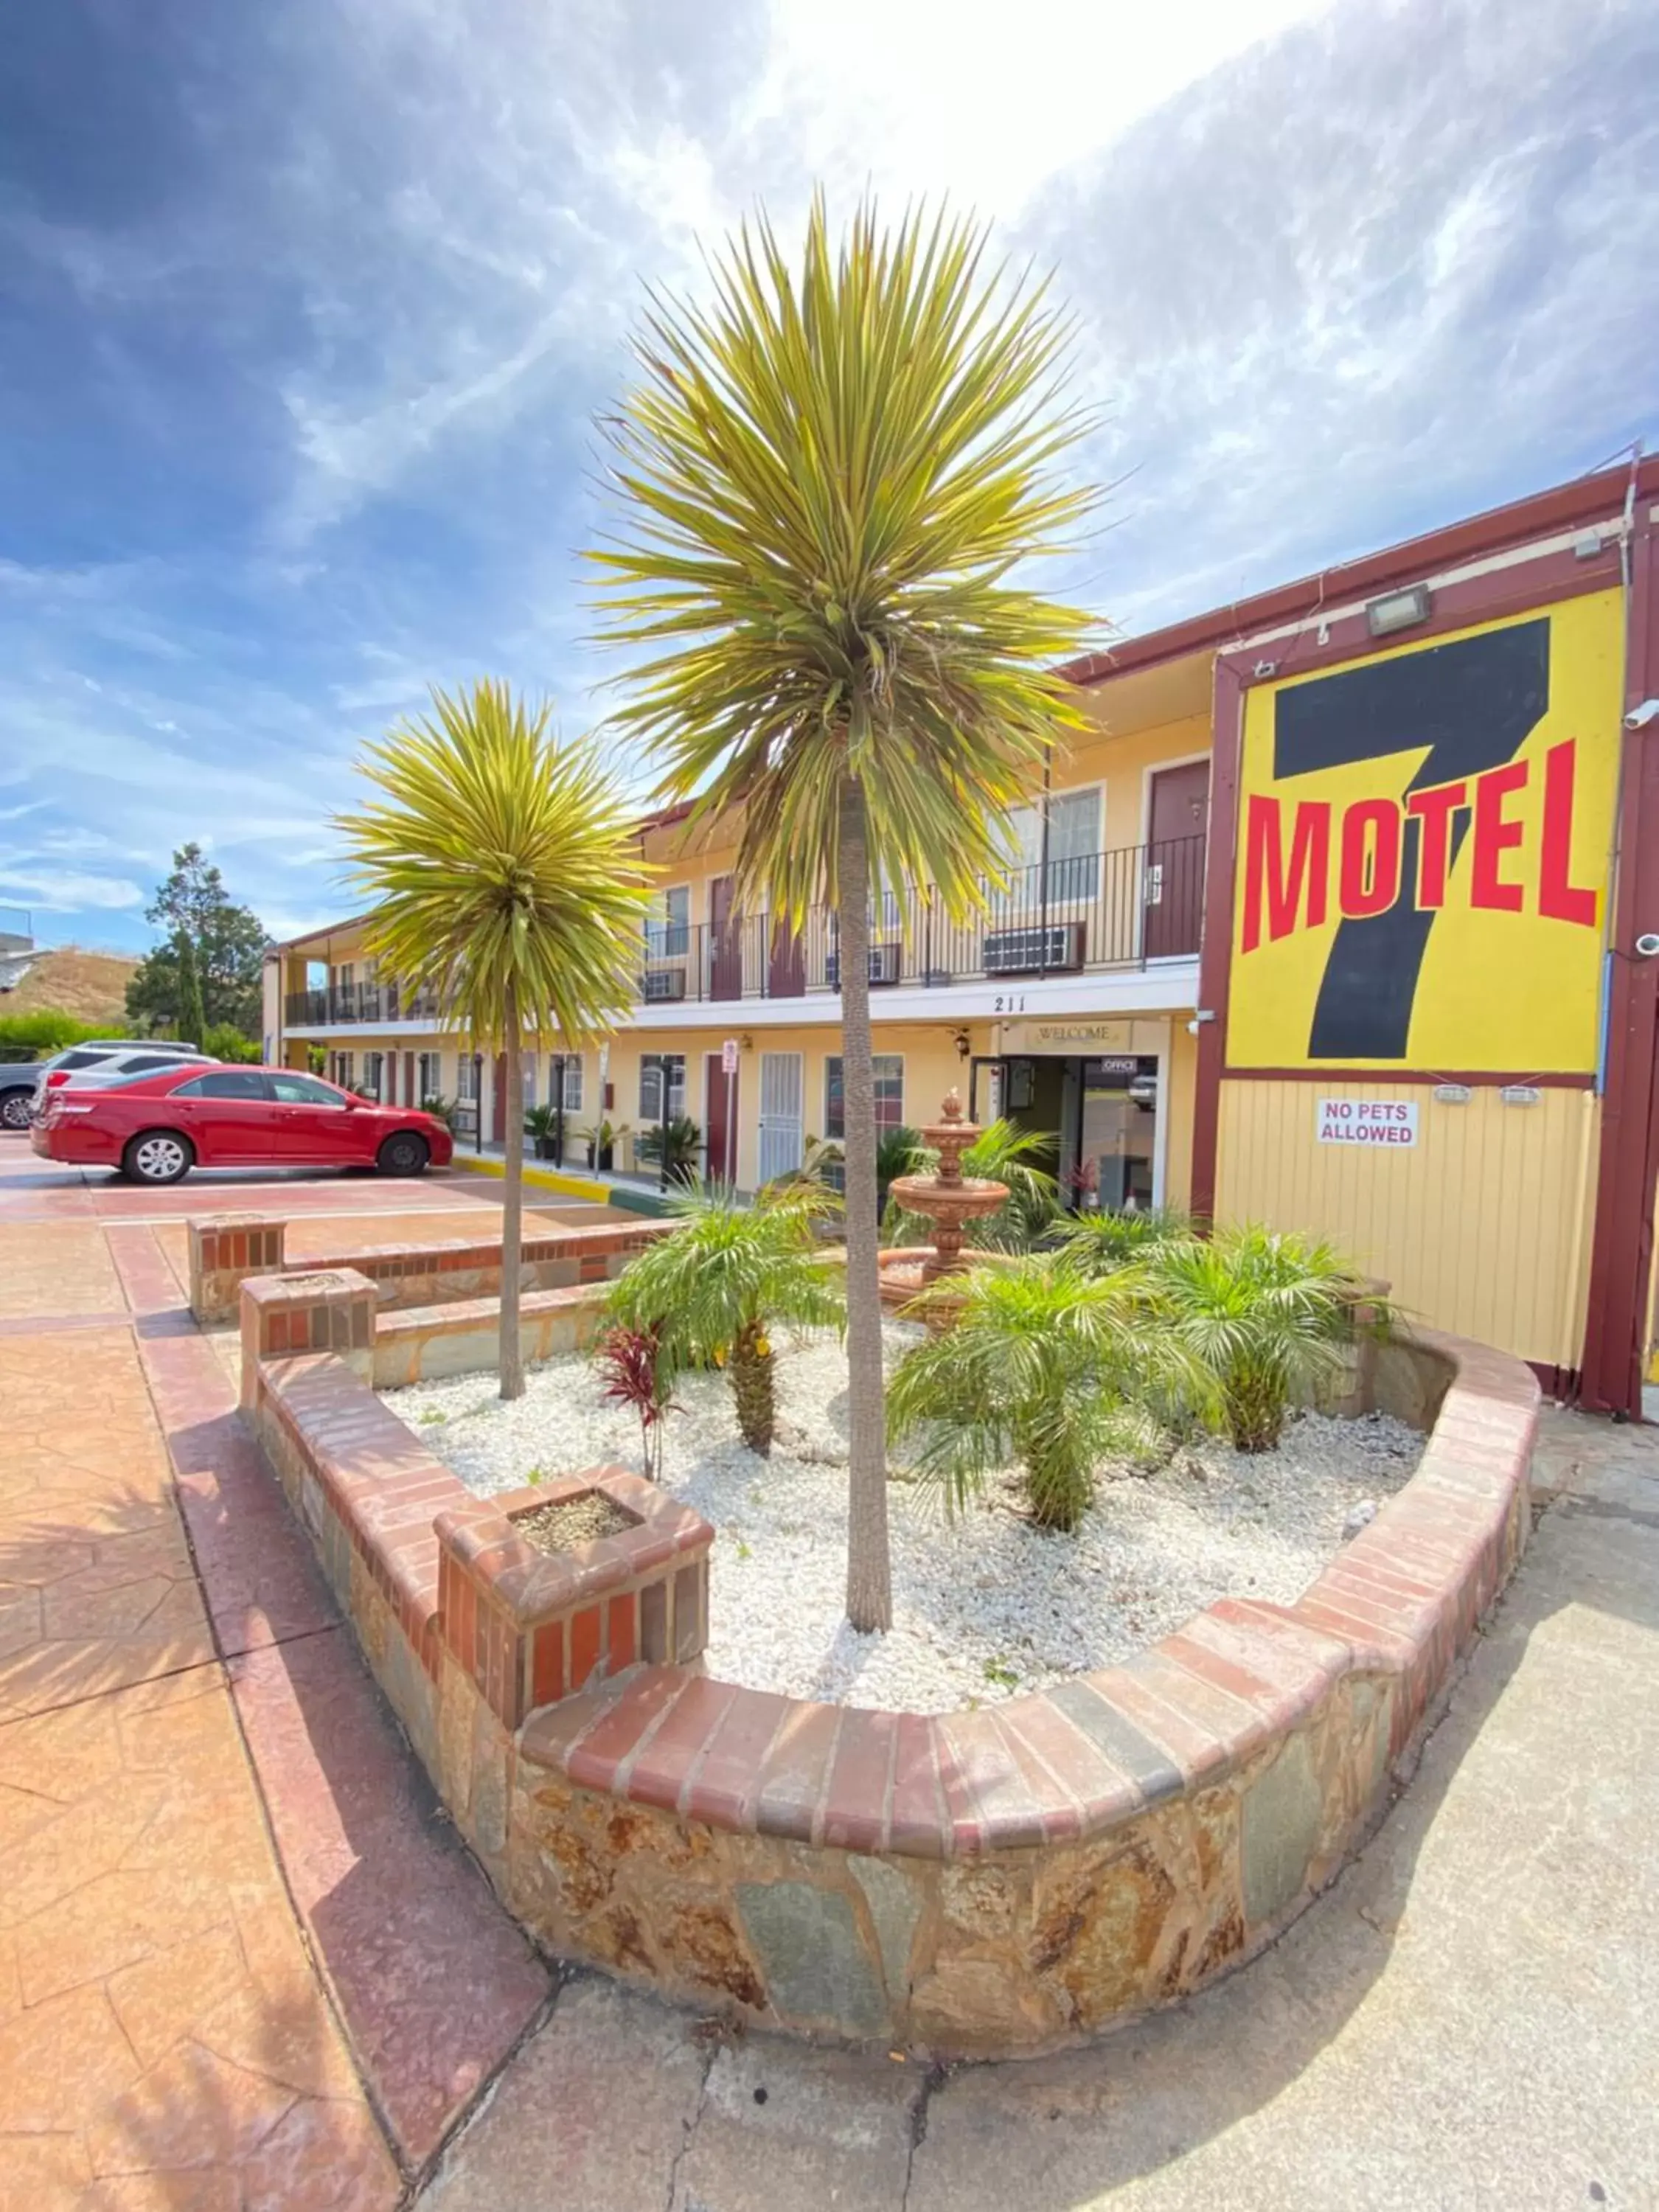 Property Building in Motel 7 - Near Six Flags, Vallejo - Napa Valley